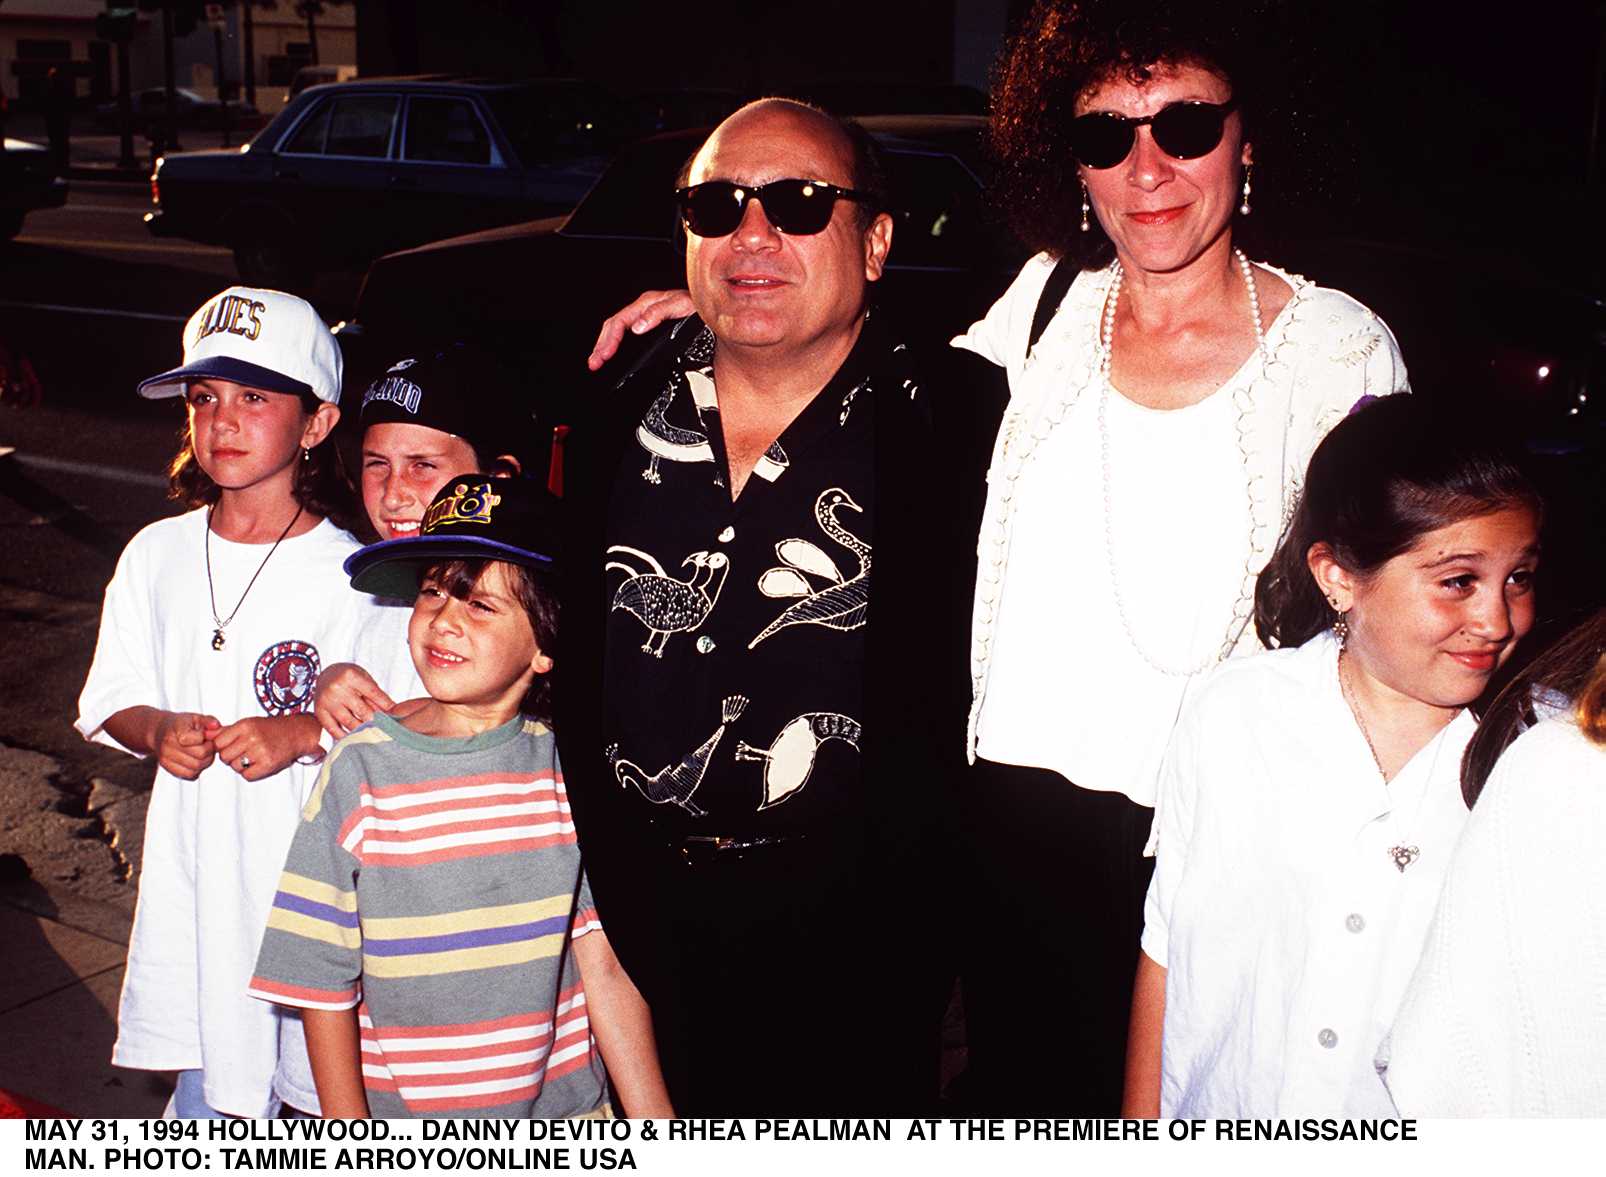 Danny Devito, wife Rhea Pearlman And Children At A Film Premiere | Source: Getty Images